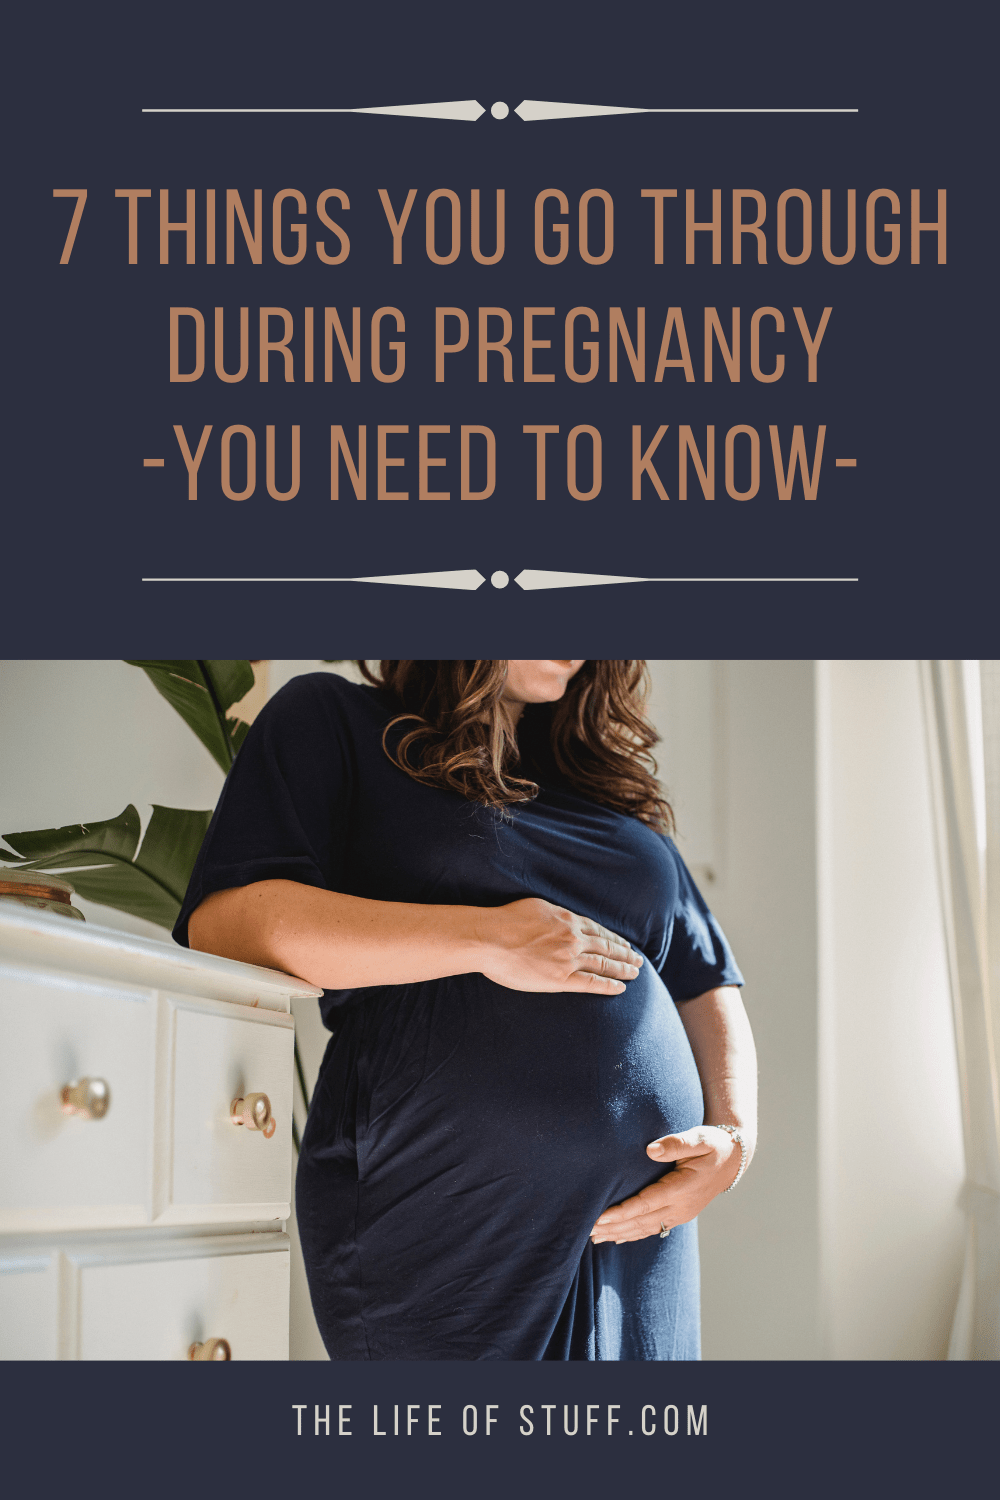 The Life of Stuff - 7 Things You Go Through During Pregnancy - You Need to Know